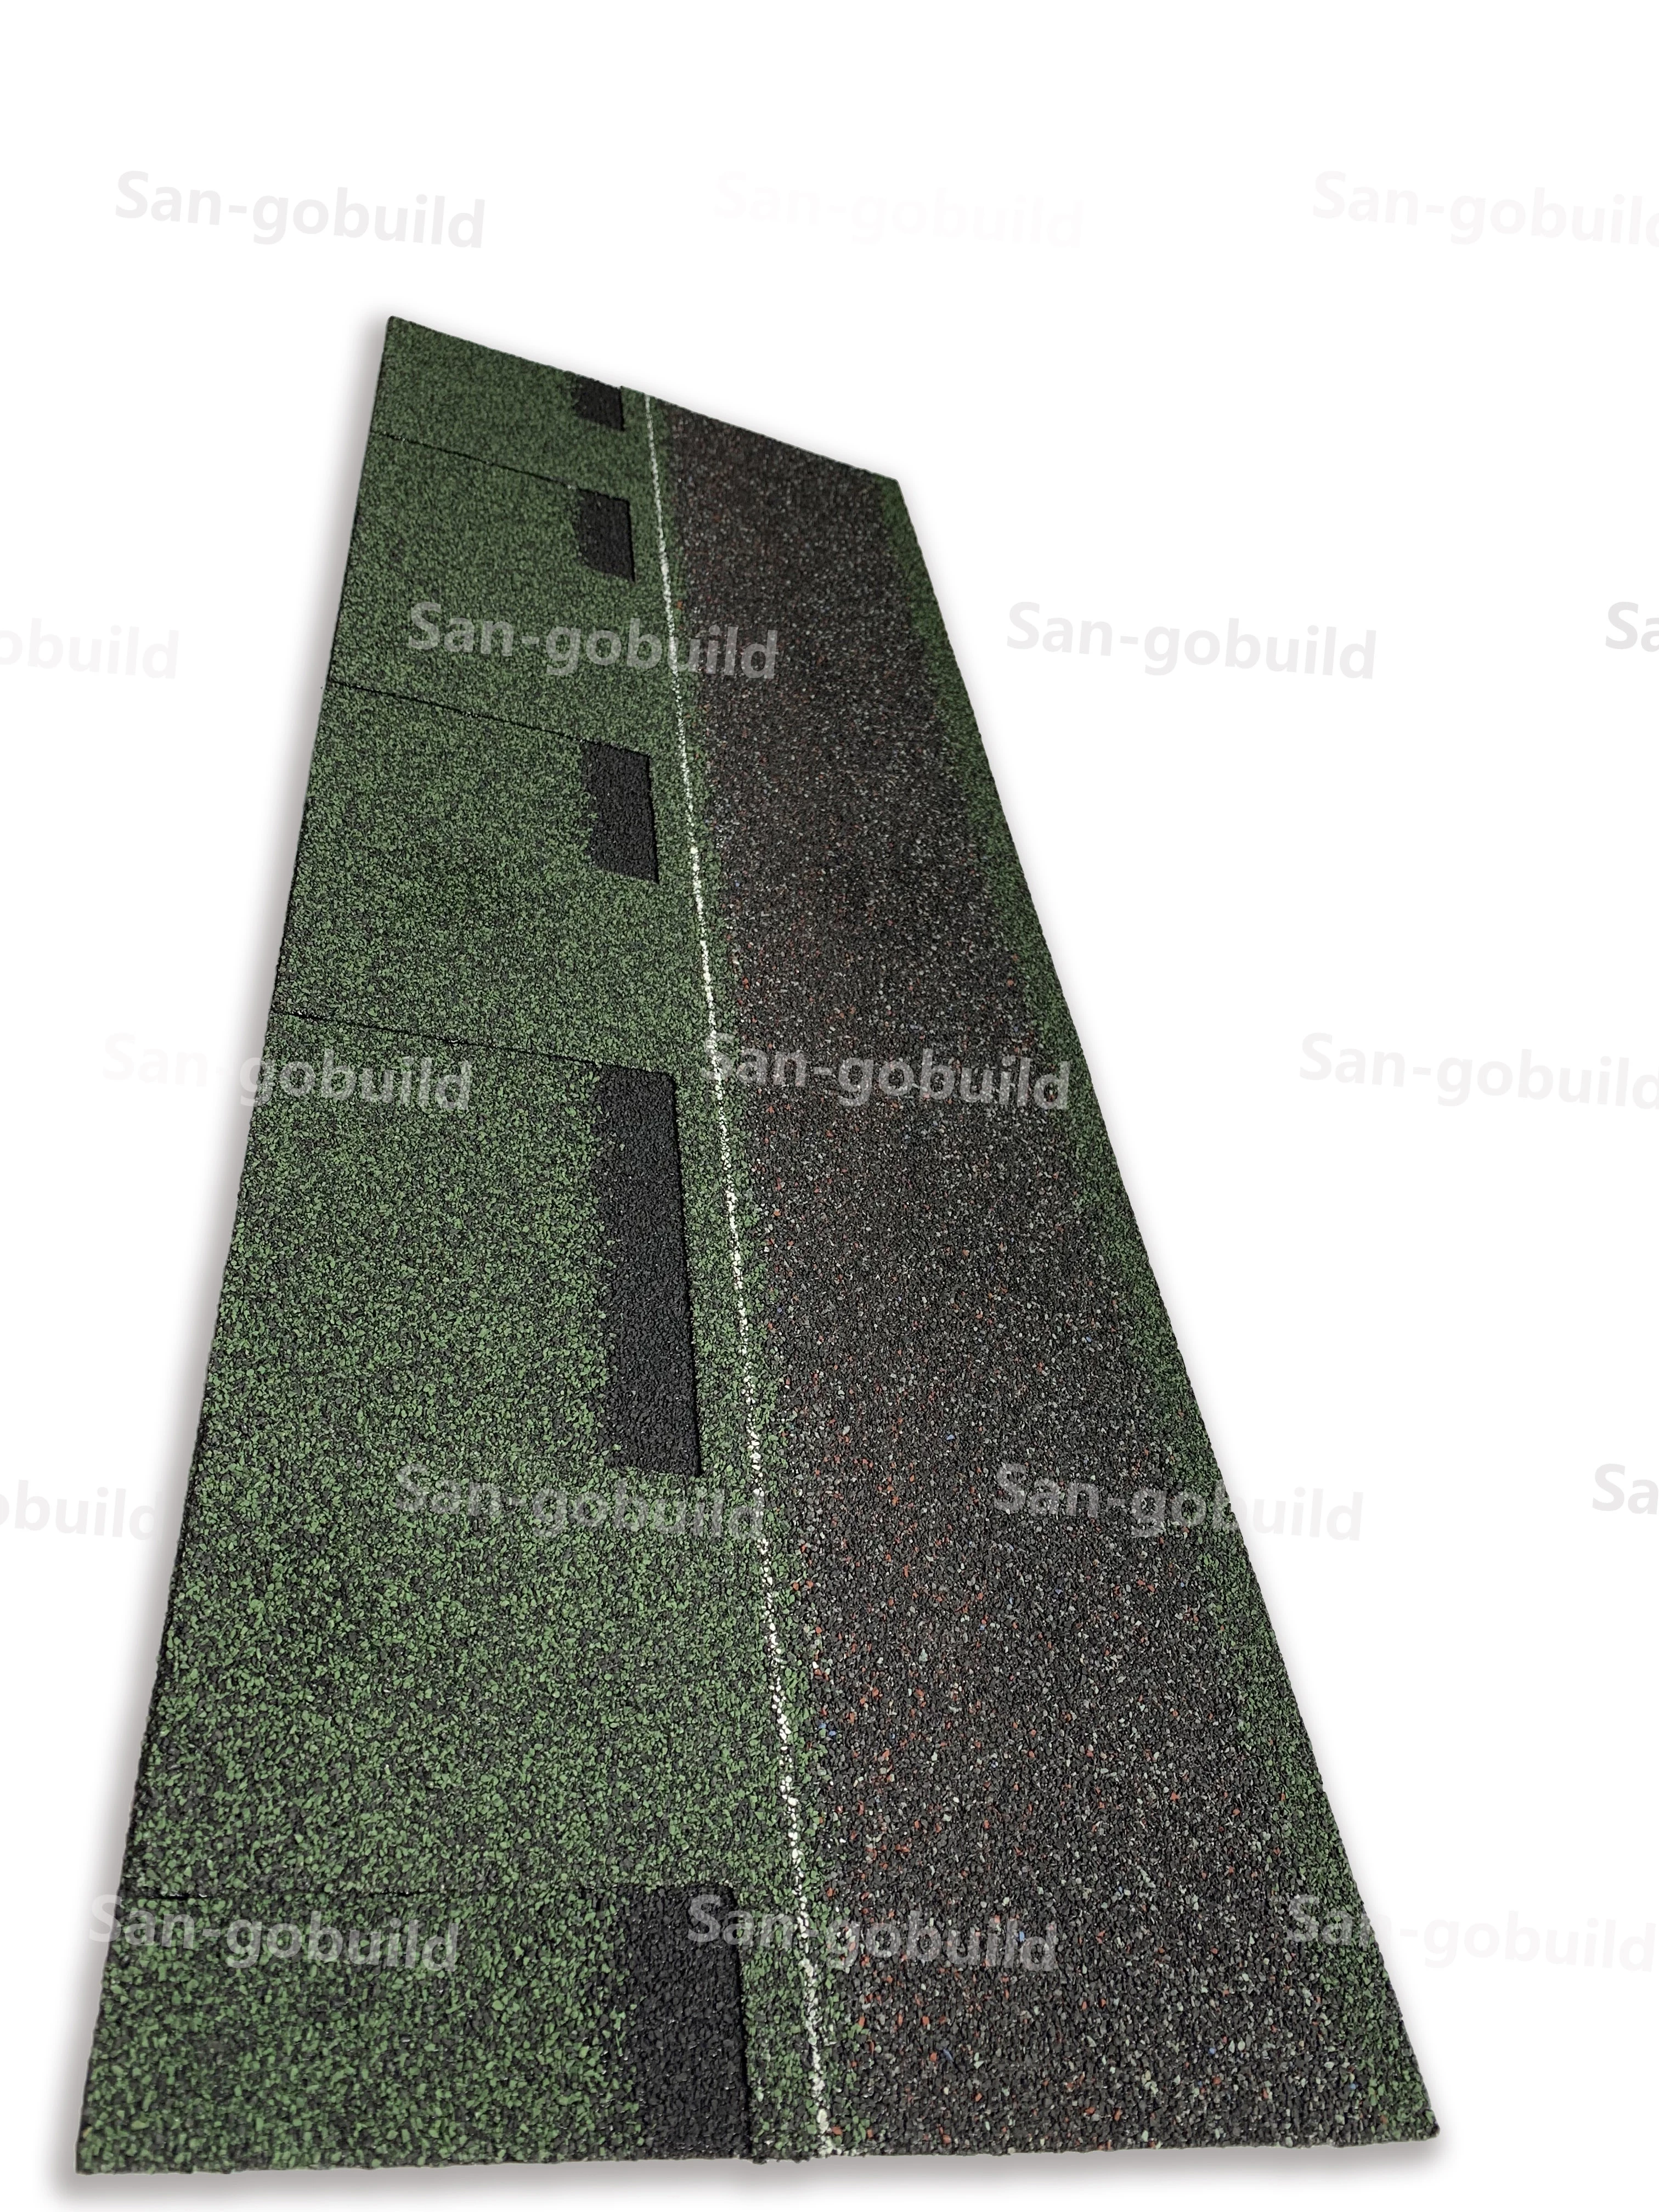 Fiberglass roofing material asphalt shingle roof coating color stone chips covered building top anti corrosion roofing sheets